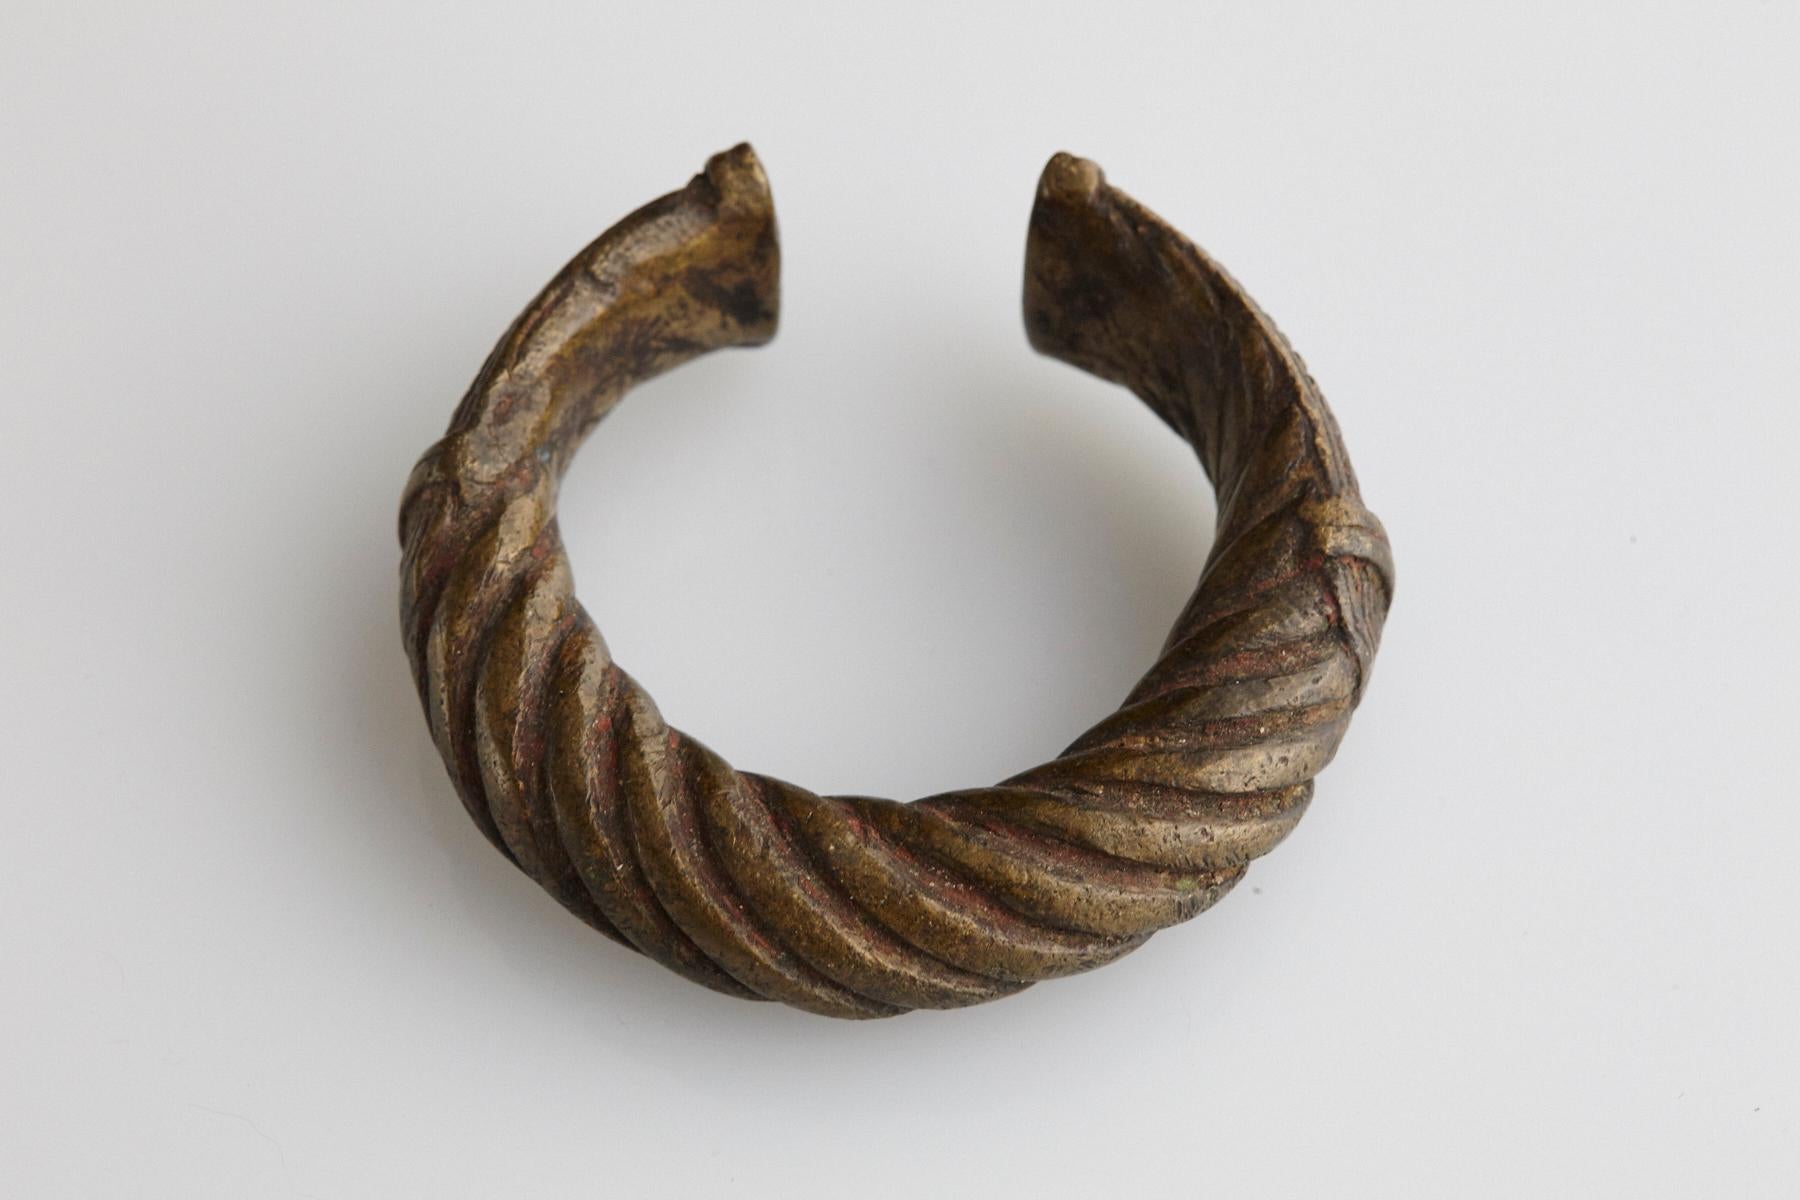 19th-century bronze currency bracelet / Manilla in horseshoe form with fixed opening. Intricate graphical swirled rope work design and tips are shaped with large flat ends with geometrical designs. This type of bracelet was used and worn by the